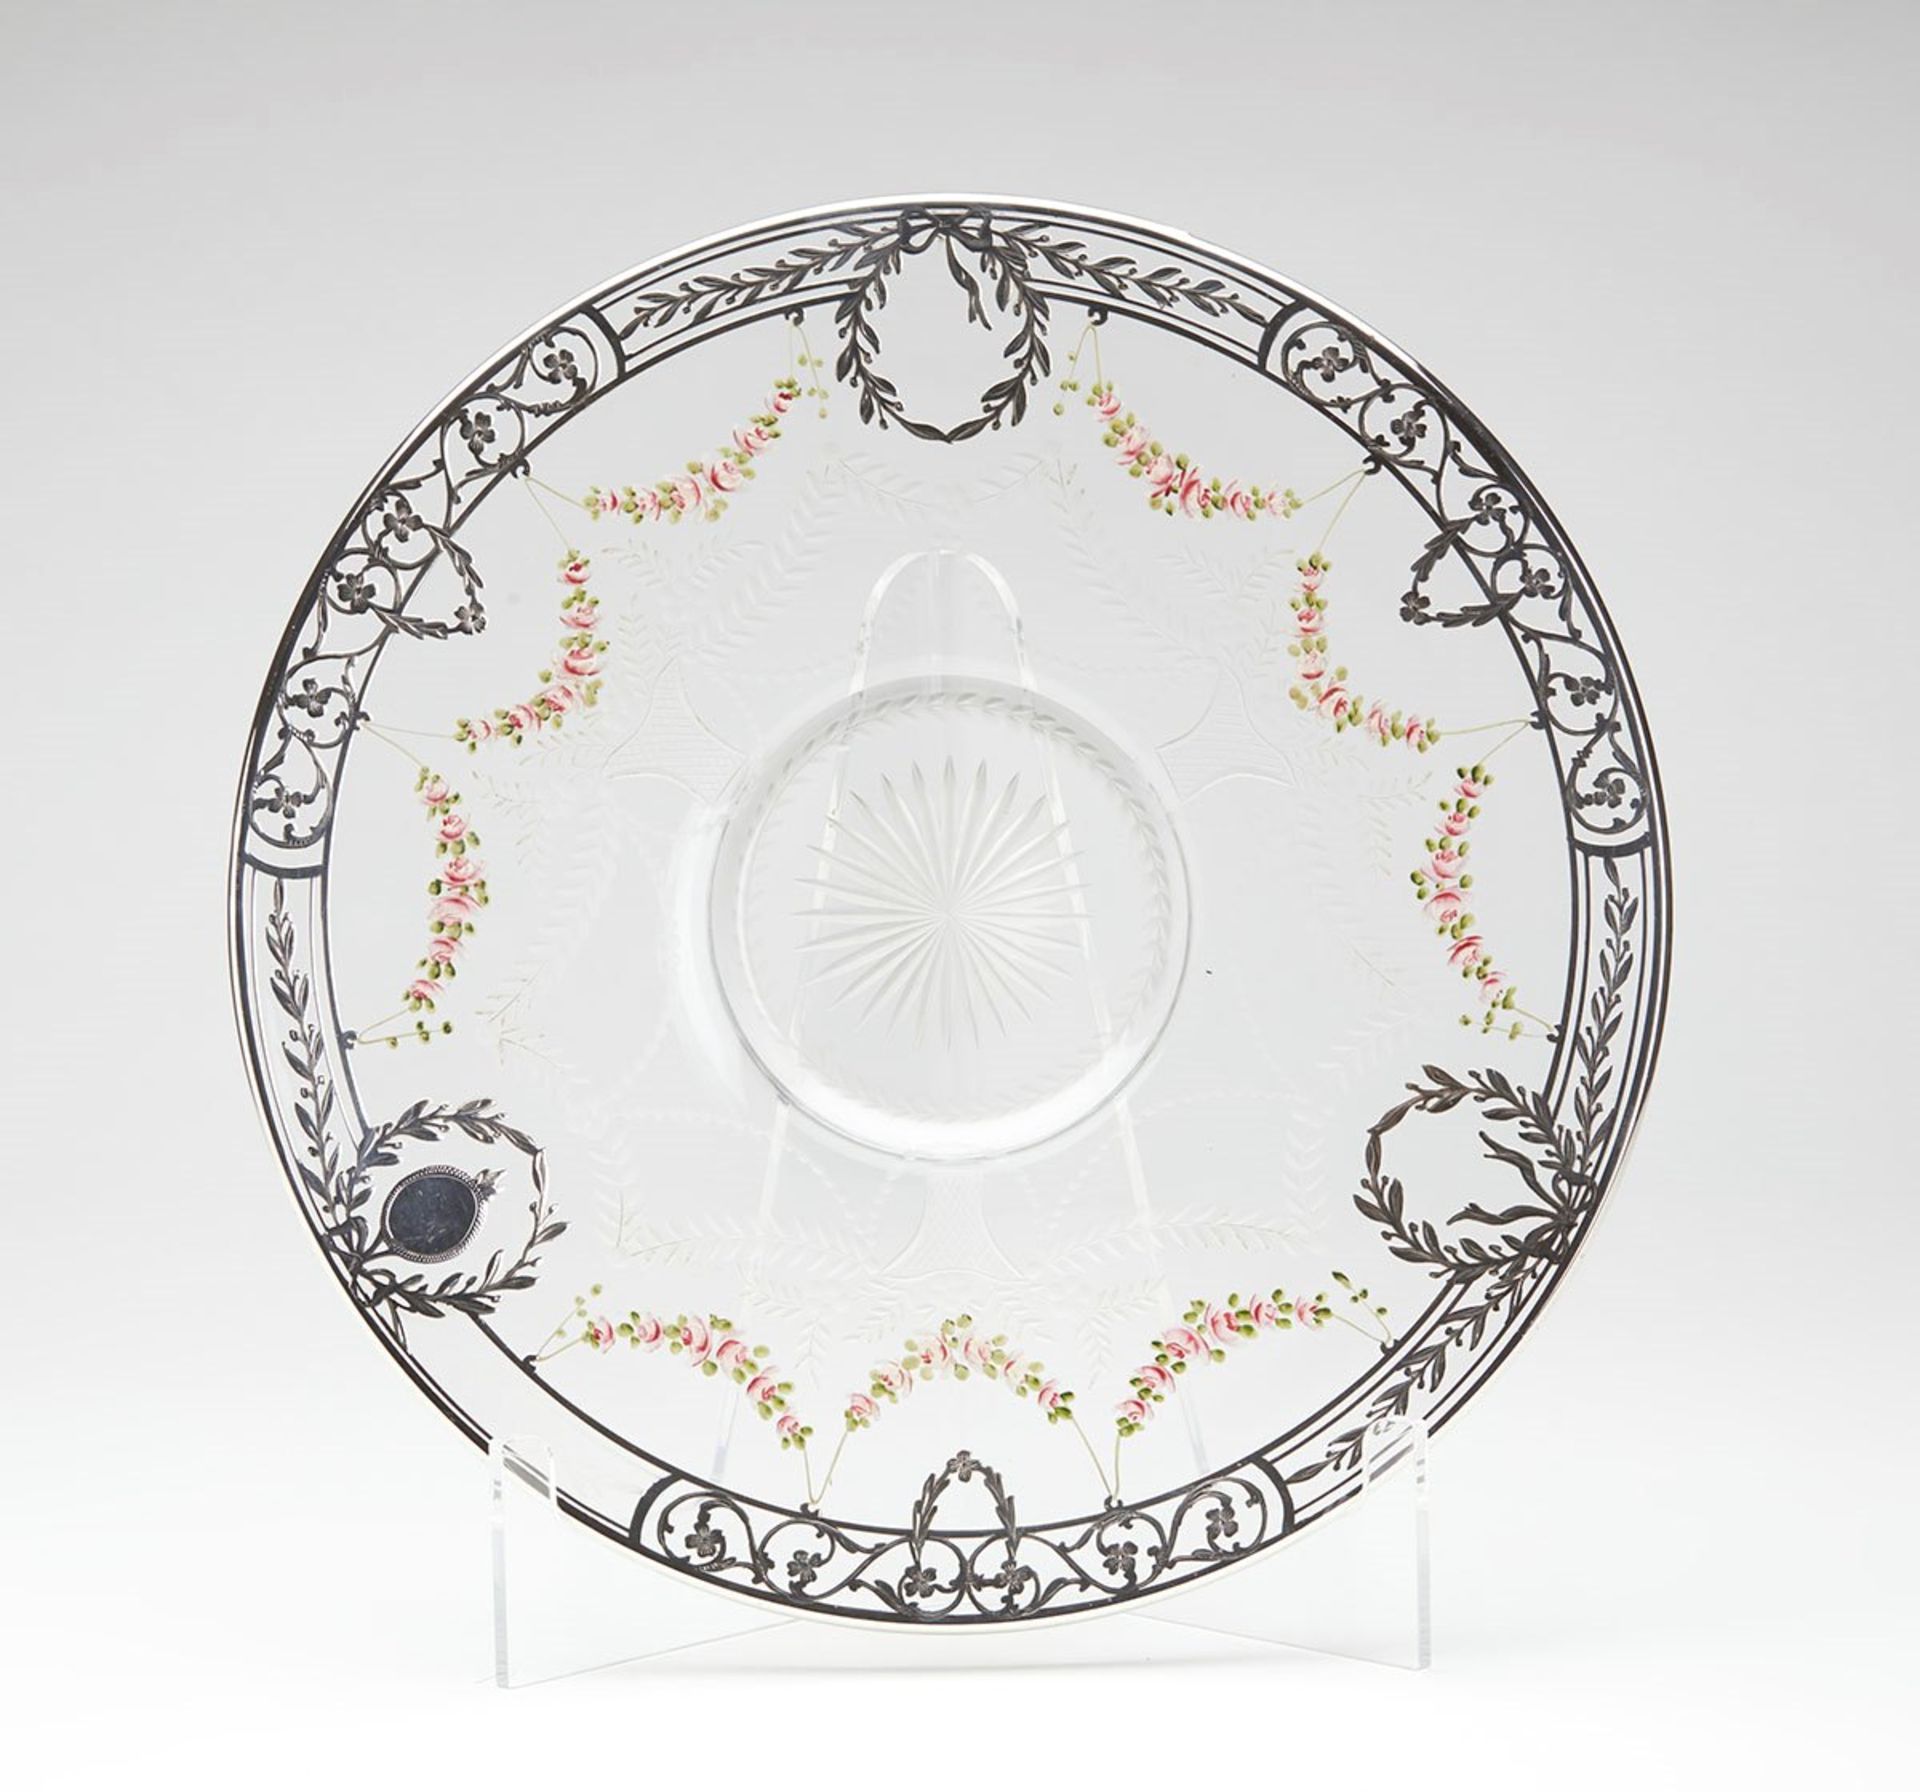 Antique Silver Overlay Floral Enamel Glass Plate 19Th C.